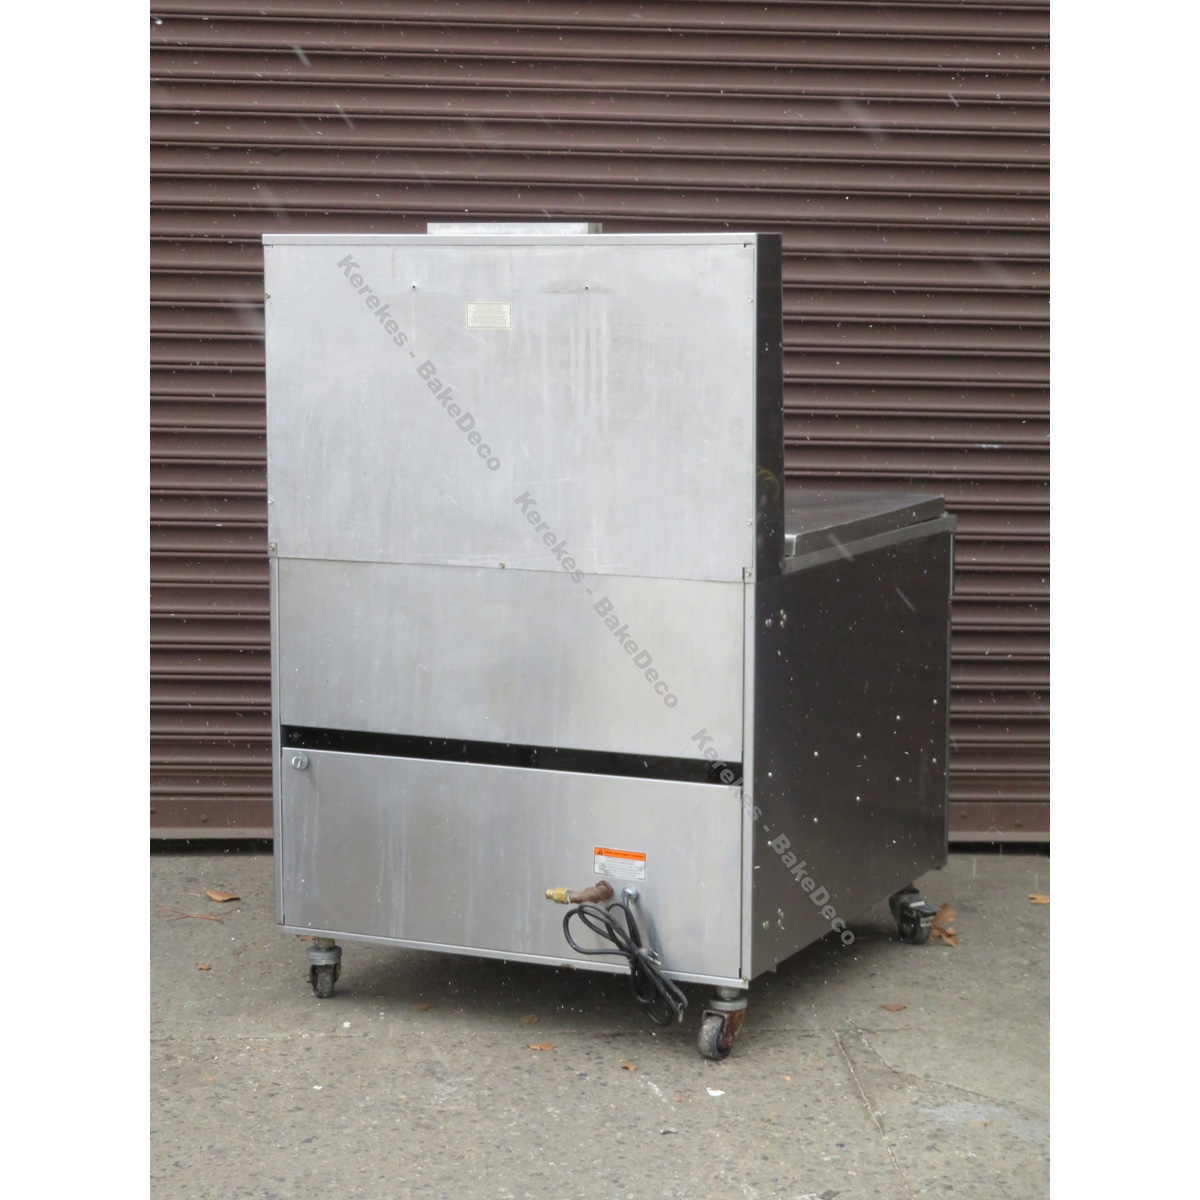 Pitco 34" Donut Fryer Model 34P Natural Gas, Used Excellent Condition image 5